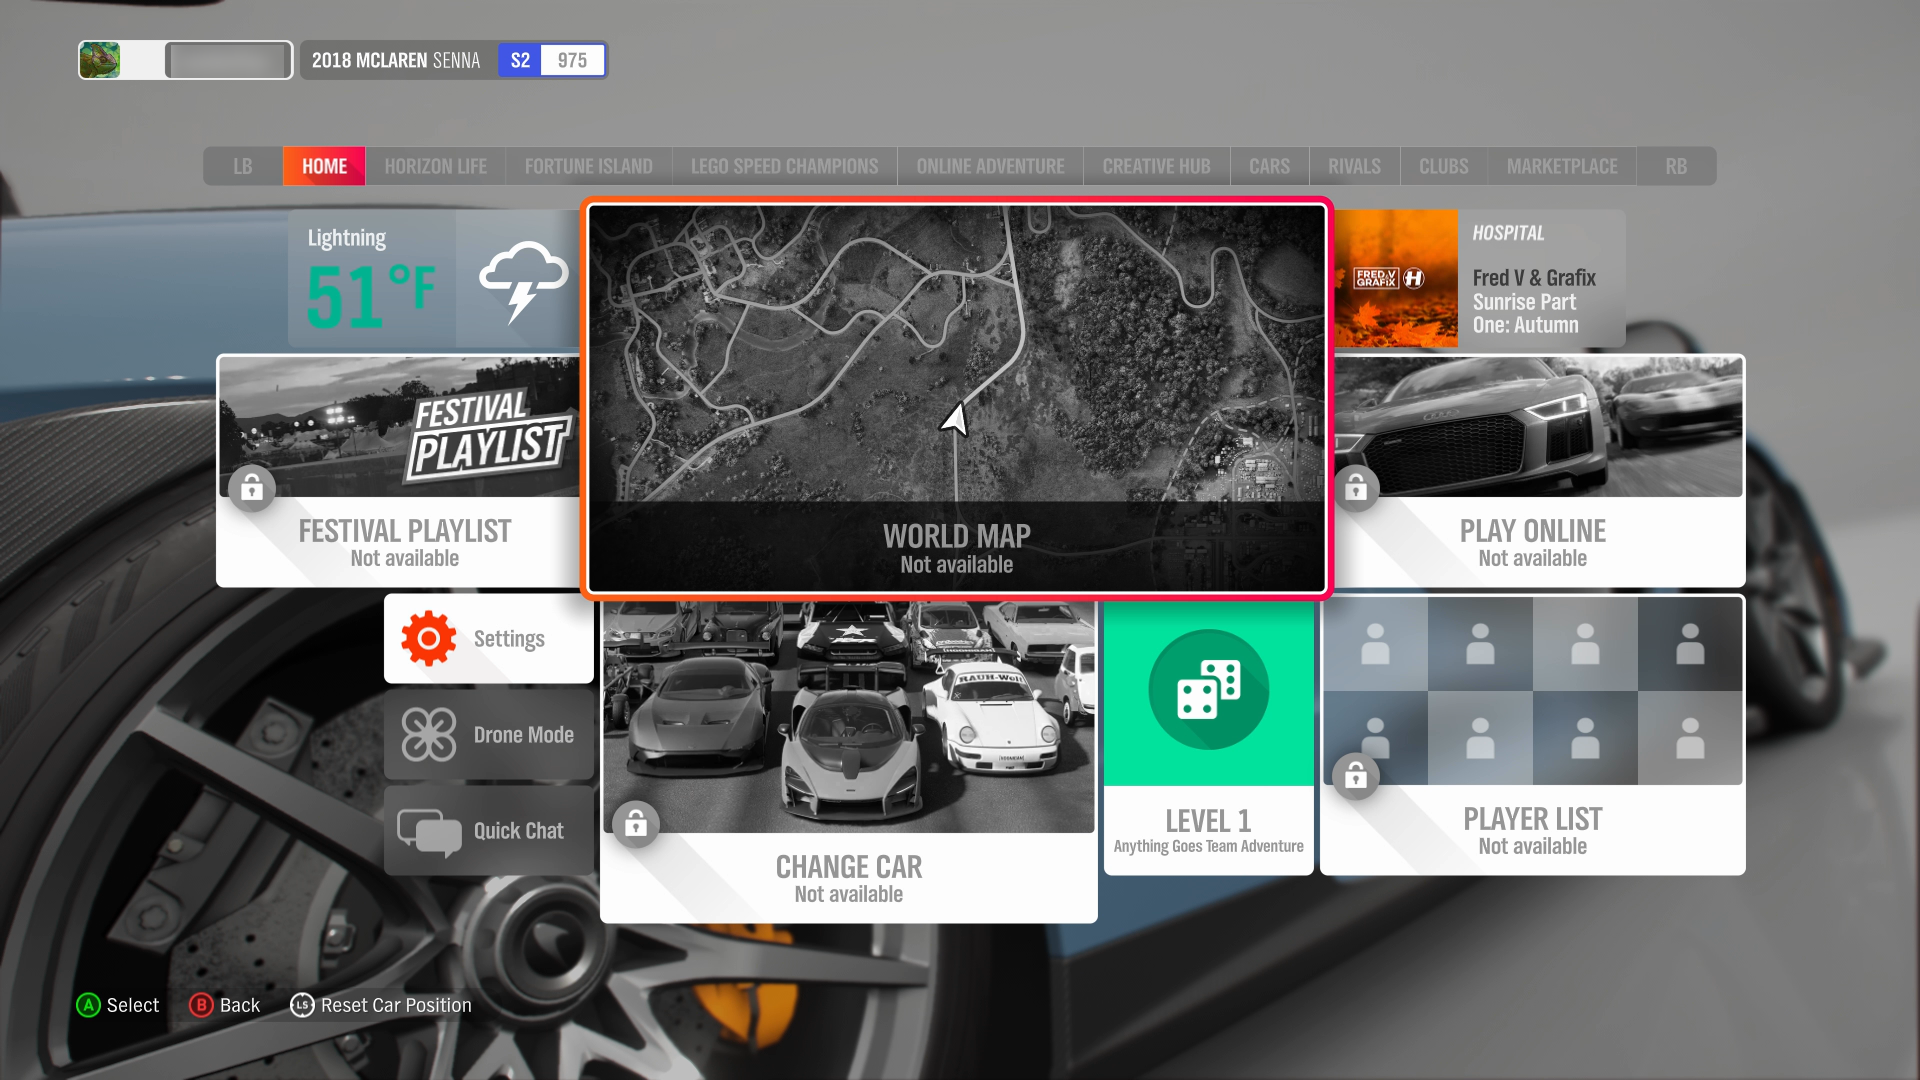 Forza Horizon pause menu. Several options are unavailable, so the options are grayed out with the words "not available" under the option name.